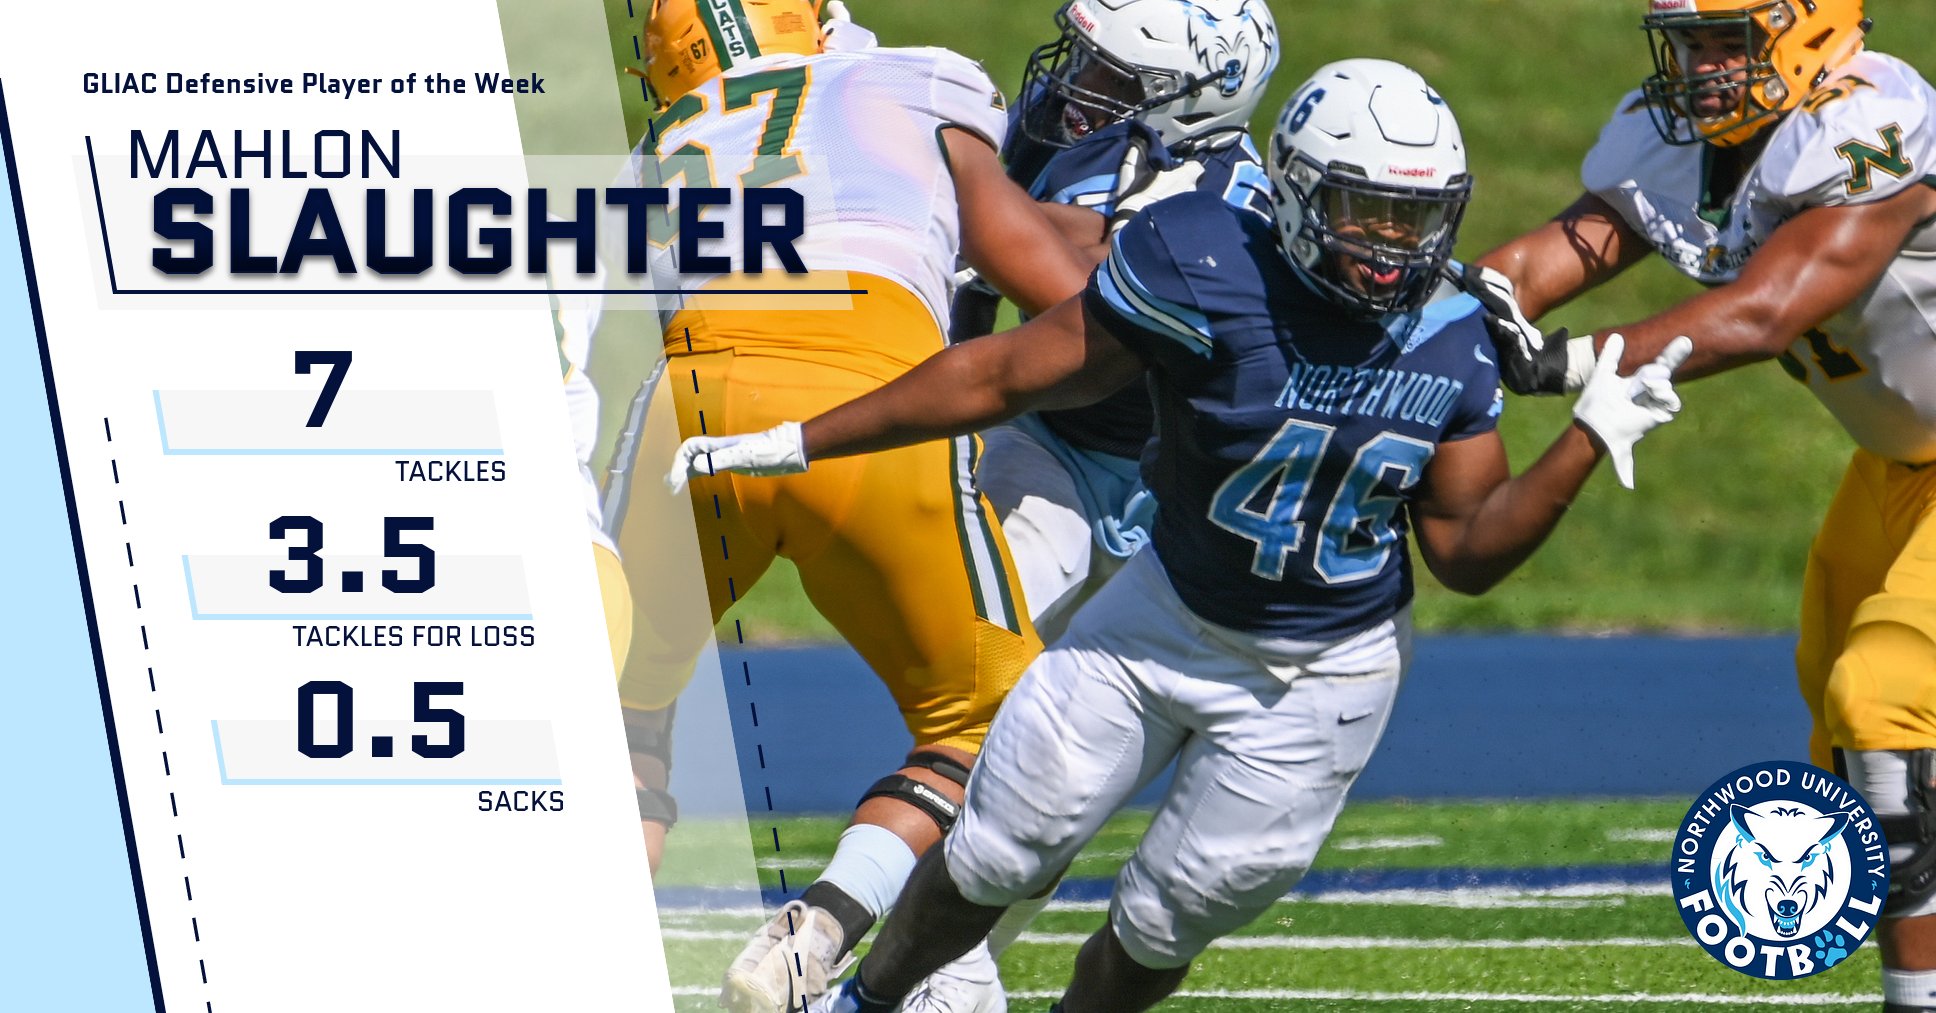 Mahlon Slaughter Named GLIAC Defensive Player of the Week